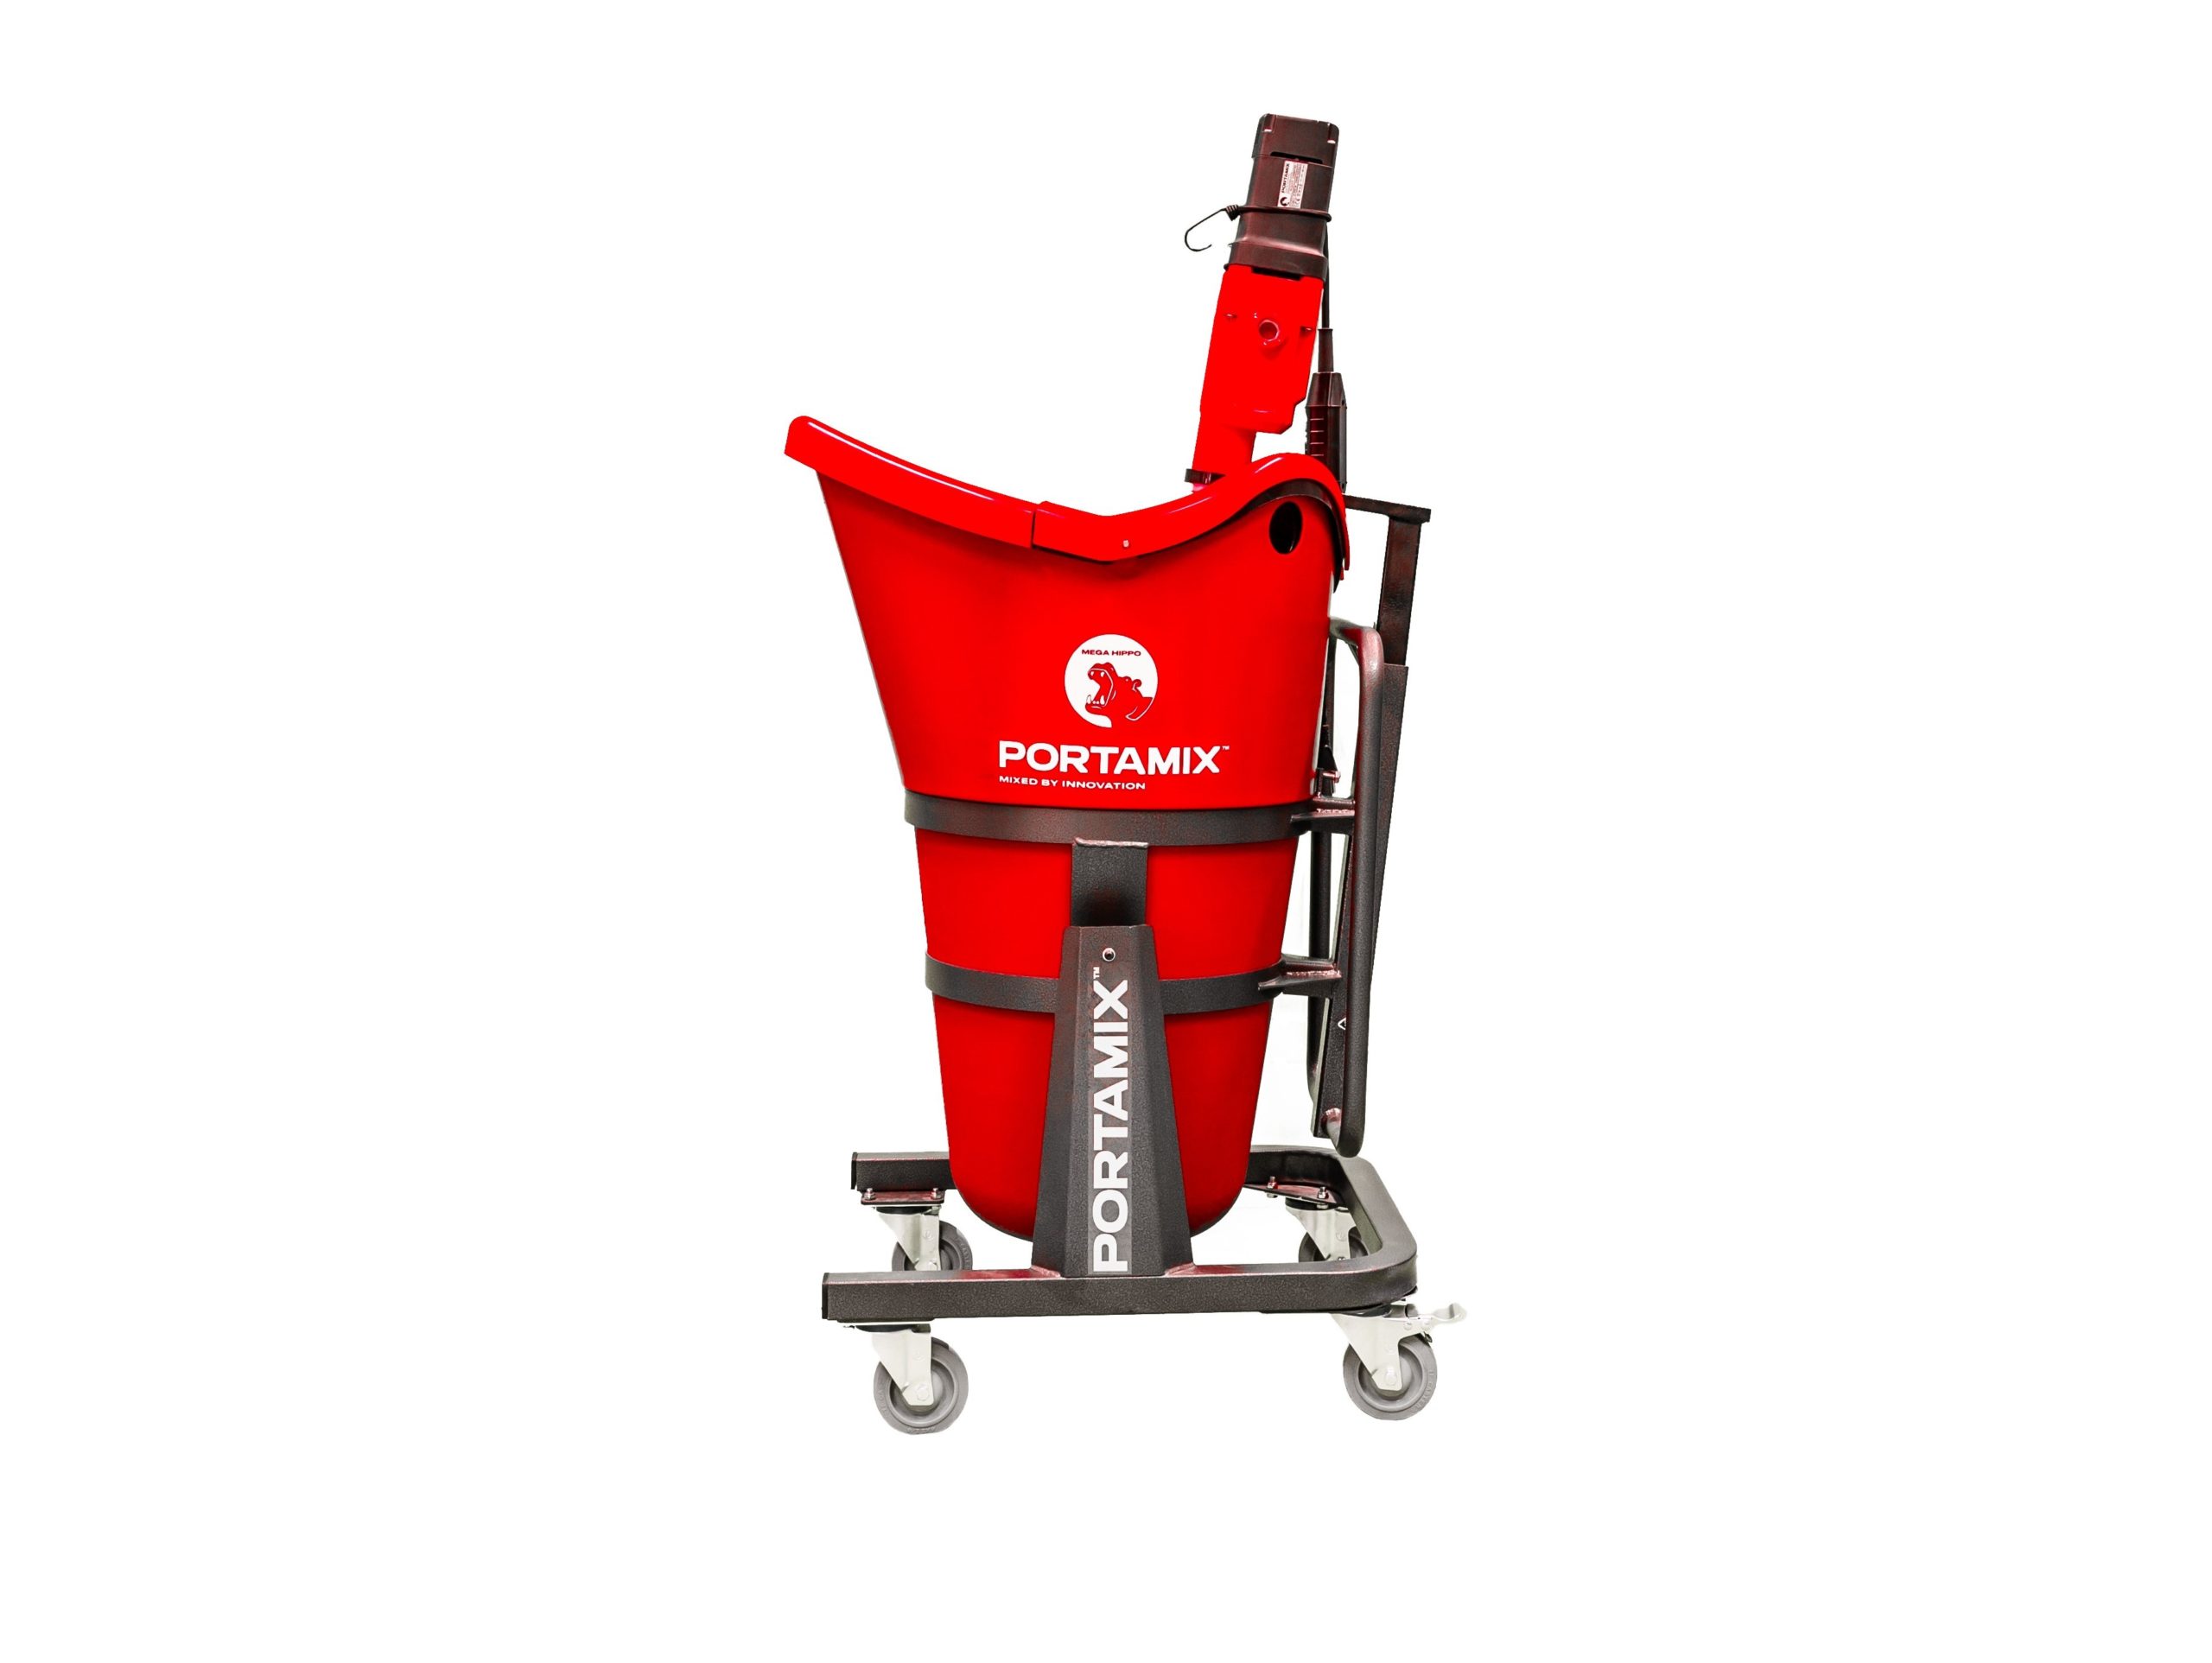 The image showcases the Portamix Mega Hippo Gen I, a robust machine designed for mixing floor installation materials for self-leveling applications. Set against a pristine white background, the machine stands out with its vibrant red canister and black handle. The canister prominently displays the "Portamix" branding, reinforcing the product's identity. The machine's design, with its sturdy build and ergonomic handle, emphasizes its functionality and capability to handle large batches of mixing. The overall presentation highlights the machine's significance for professionals in the flooring industry, ensuring consistent and efficient mixing results.